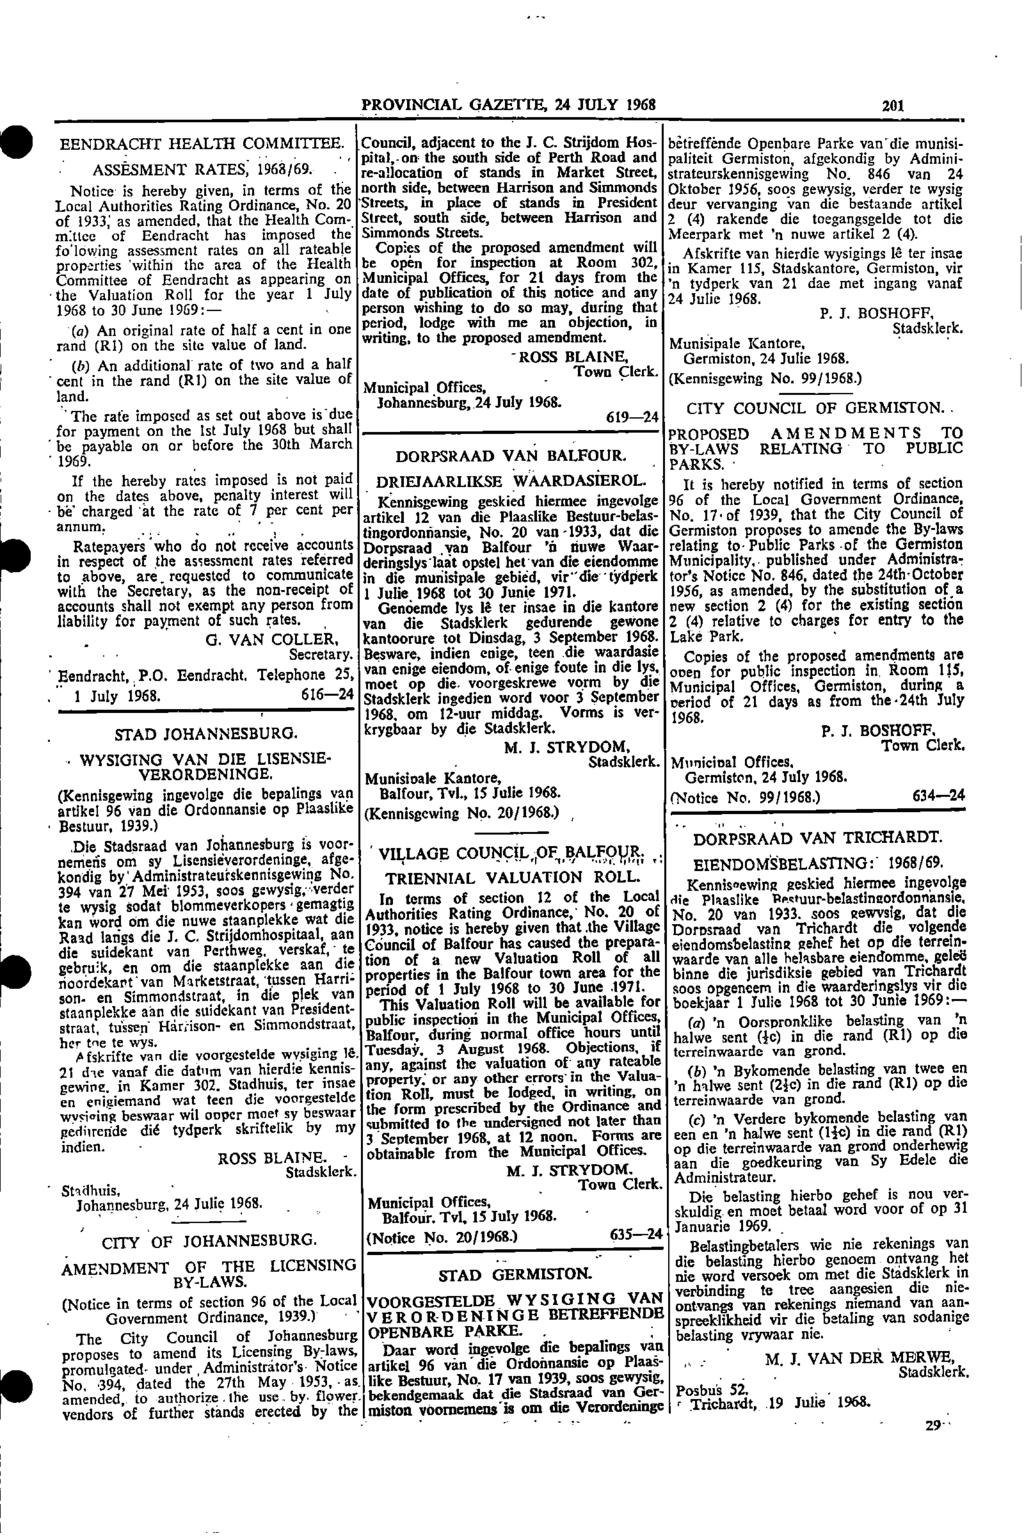 I I 1 PROVINCIAL GAZETTE, 24 JULY 1968 201 Council, adjacent to the J C Strijdom Hos betreffende Openbare Parke van EENDRACHT HEALTH COMMITTEE die munisipitail, on the south side of Perth Road and